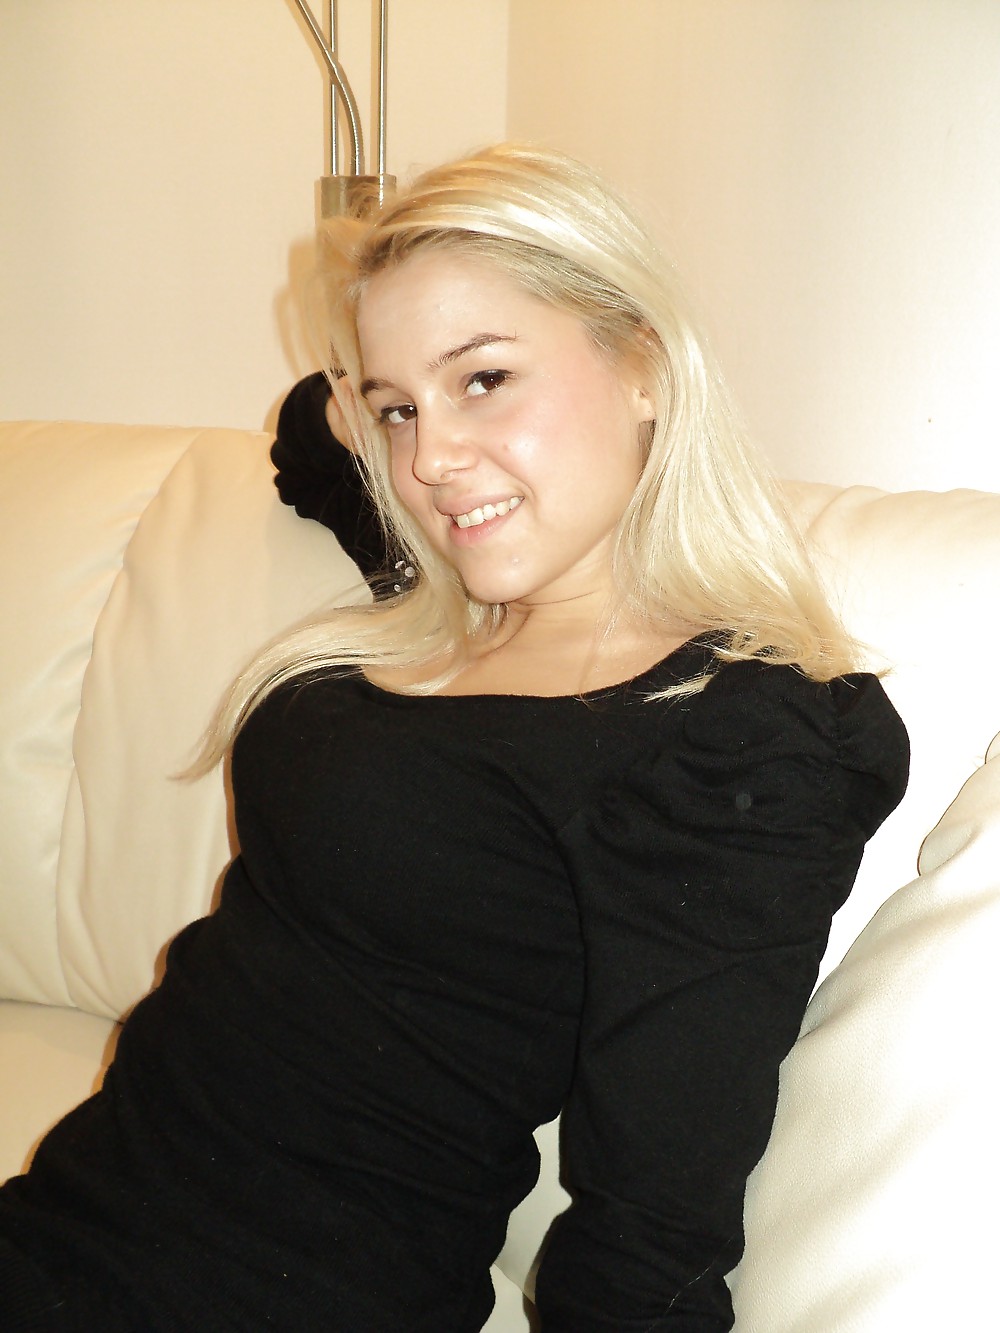 Sex Sexy Nordic Blonde Babe image